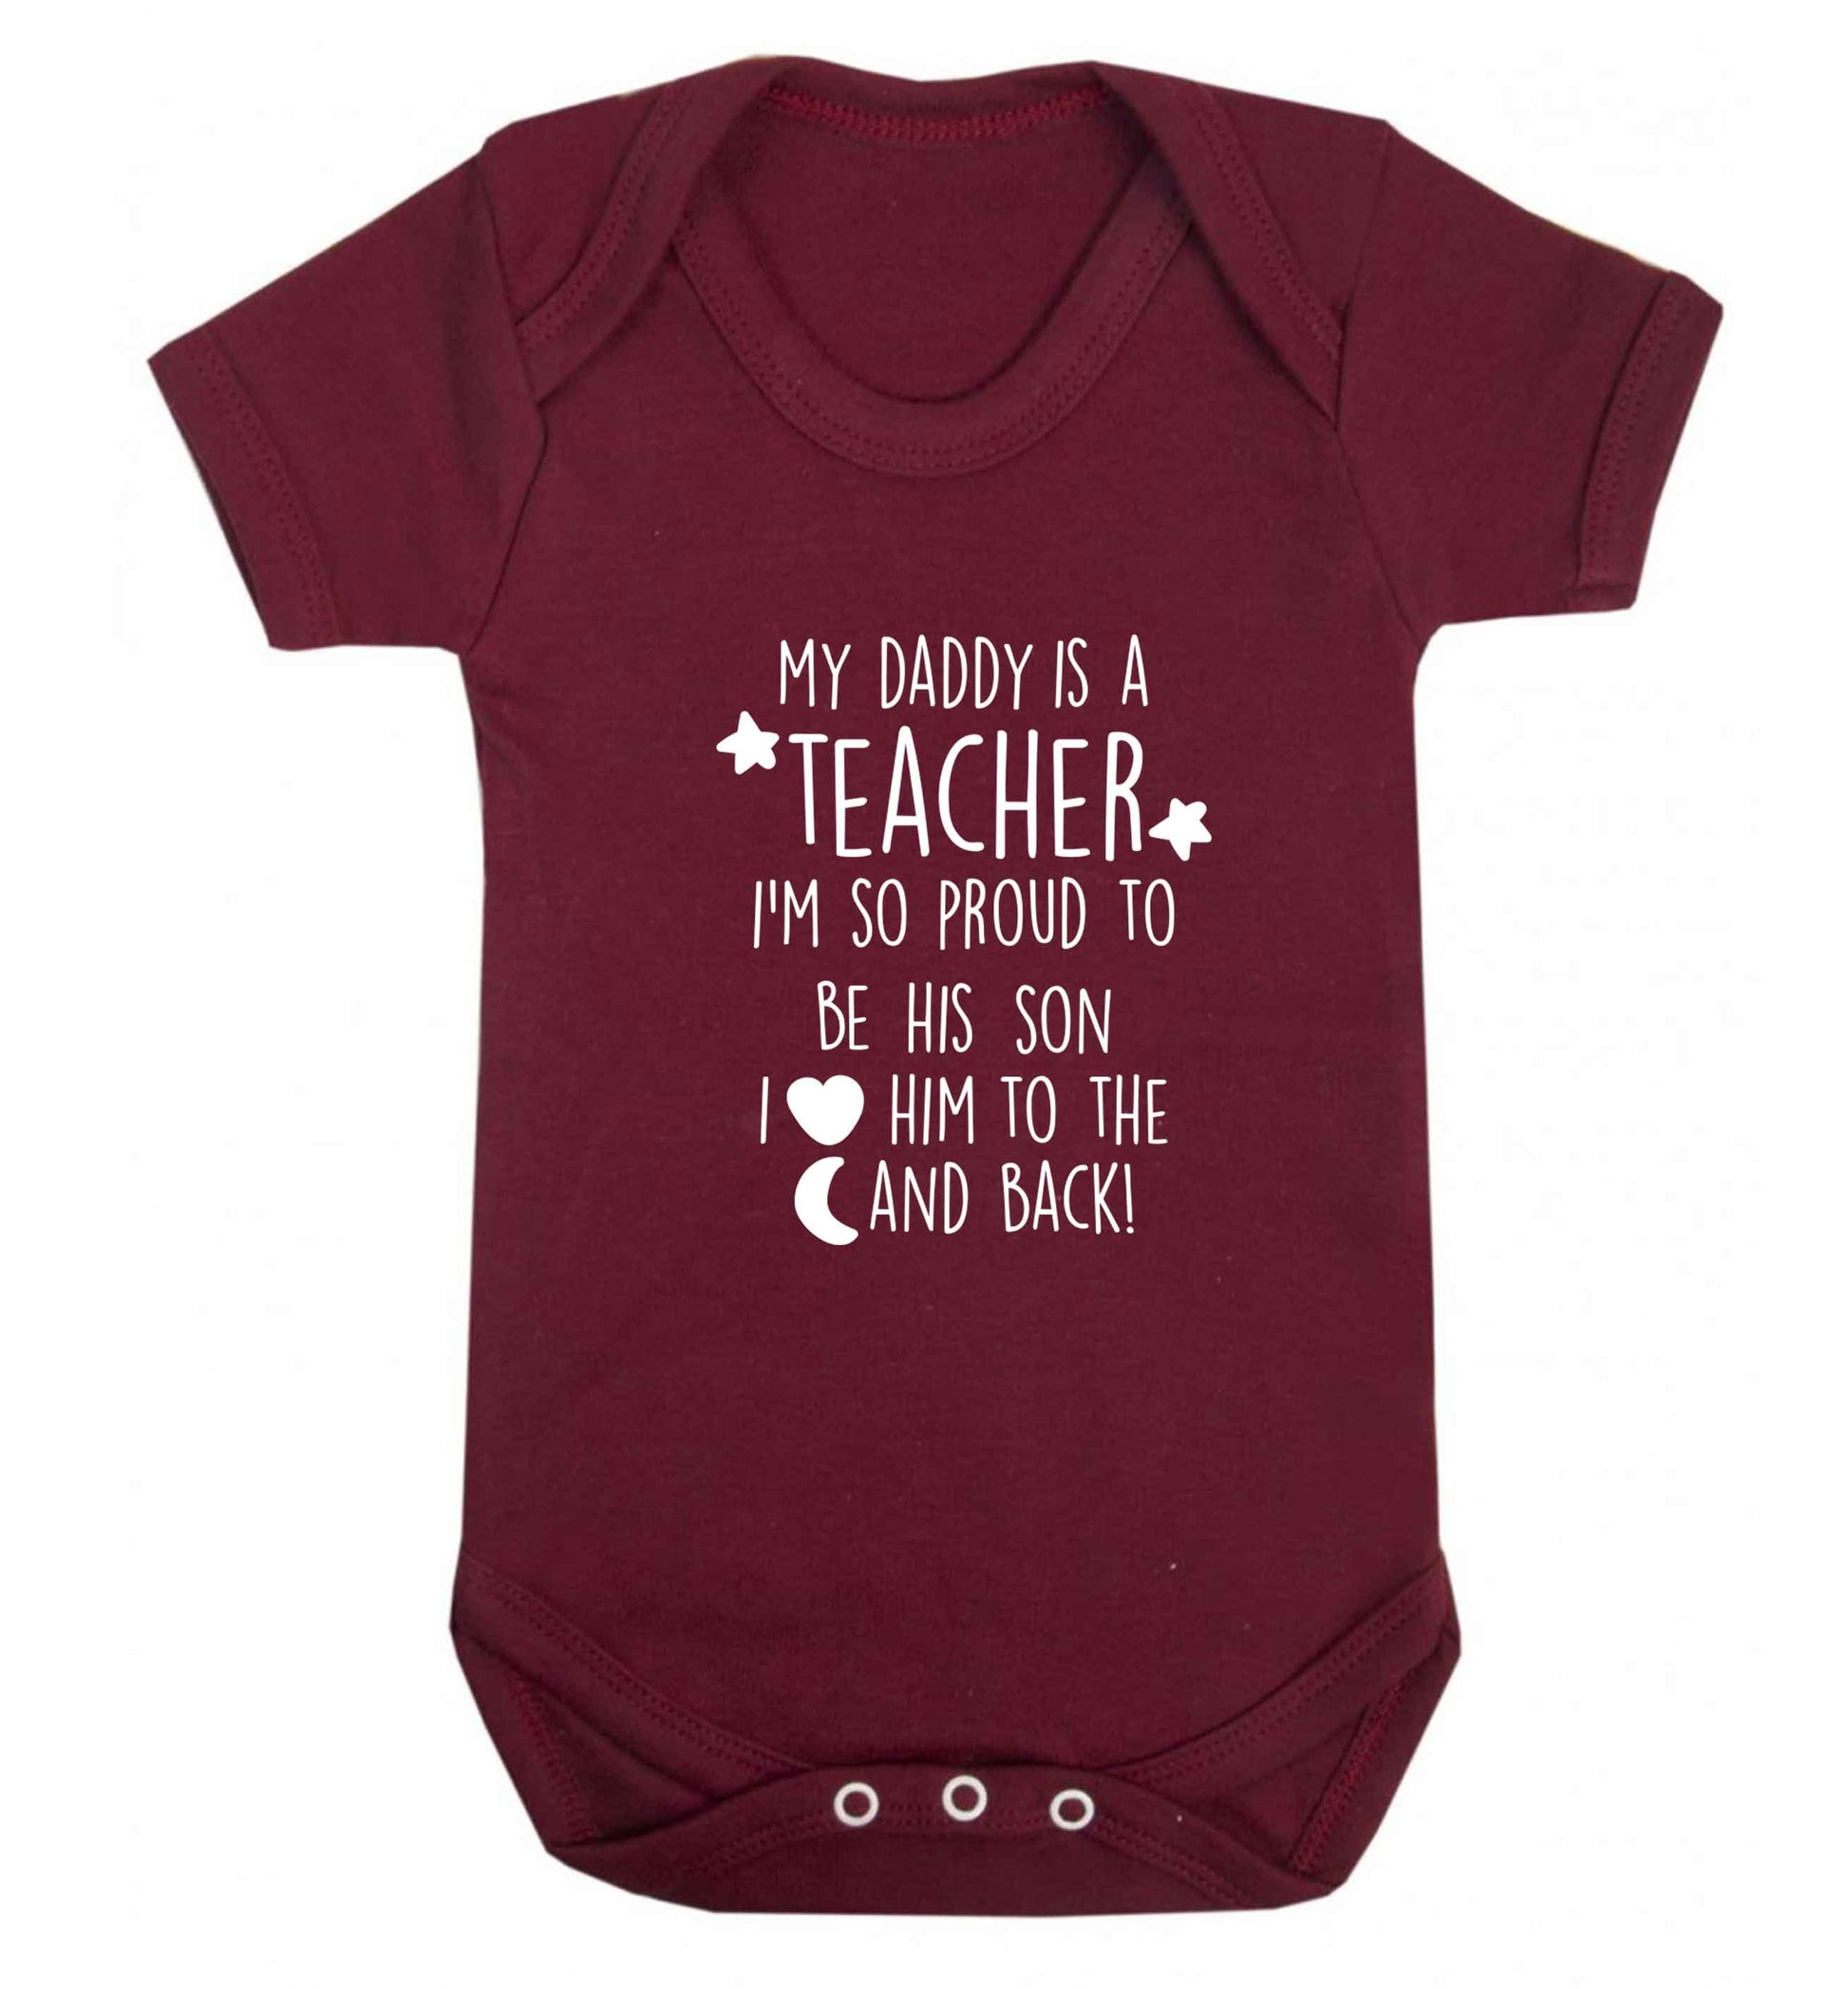 My daddy is a teacher I'm so proud to be his son I love her to the moon and back baby vest maroon 18-24 months